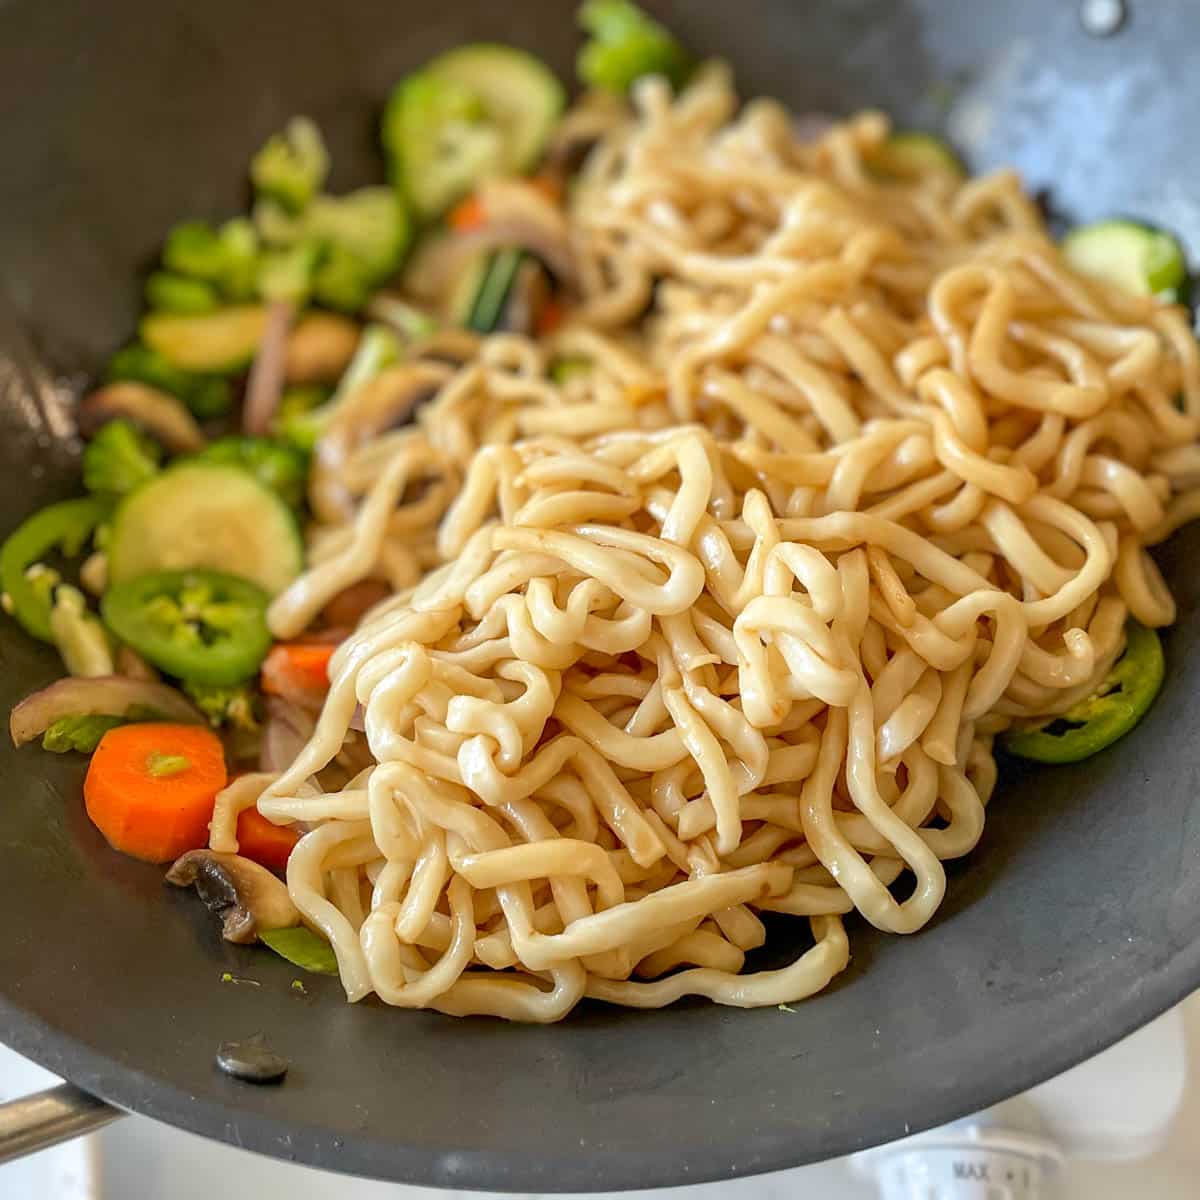 Noodles are added to the wok with vegetables.